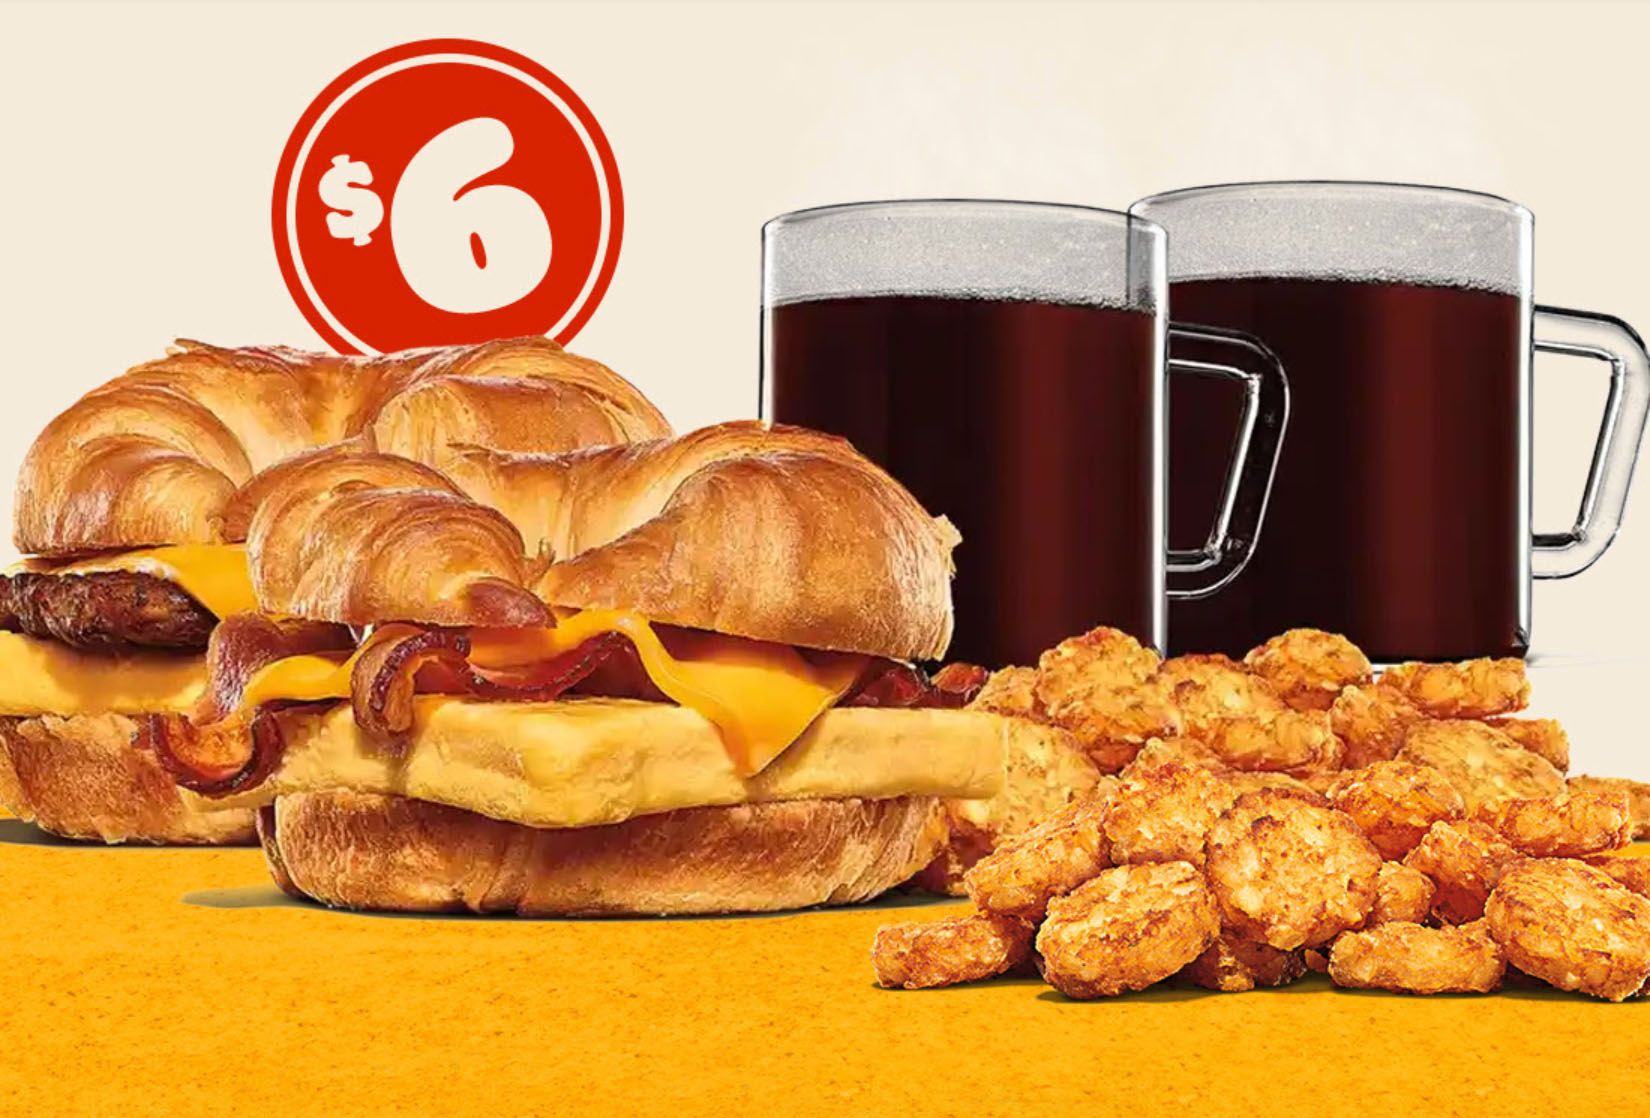 Save with the $6 Croissan’wich Meal for 2 Using Your Burger King Account Through the BK App or Website